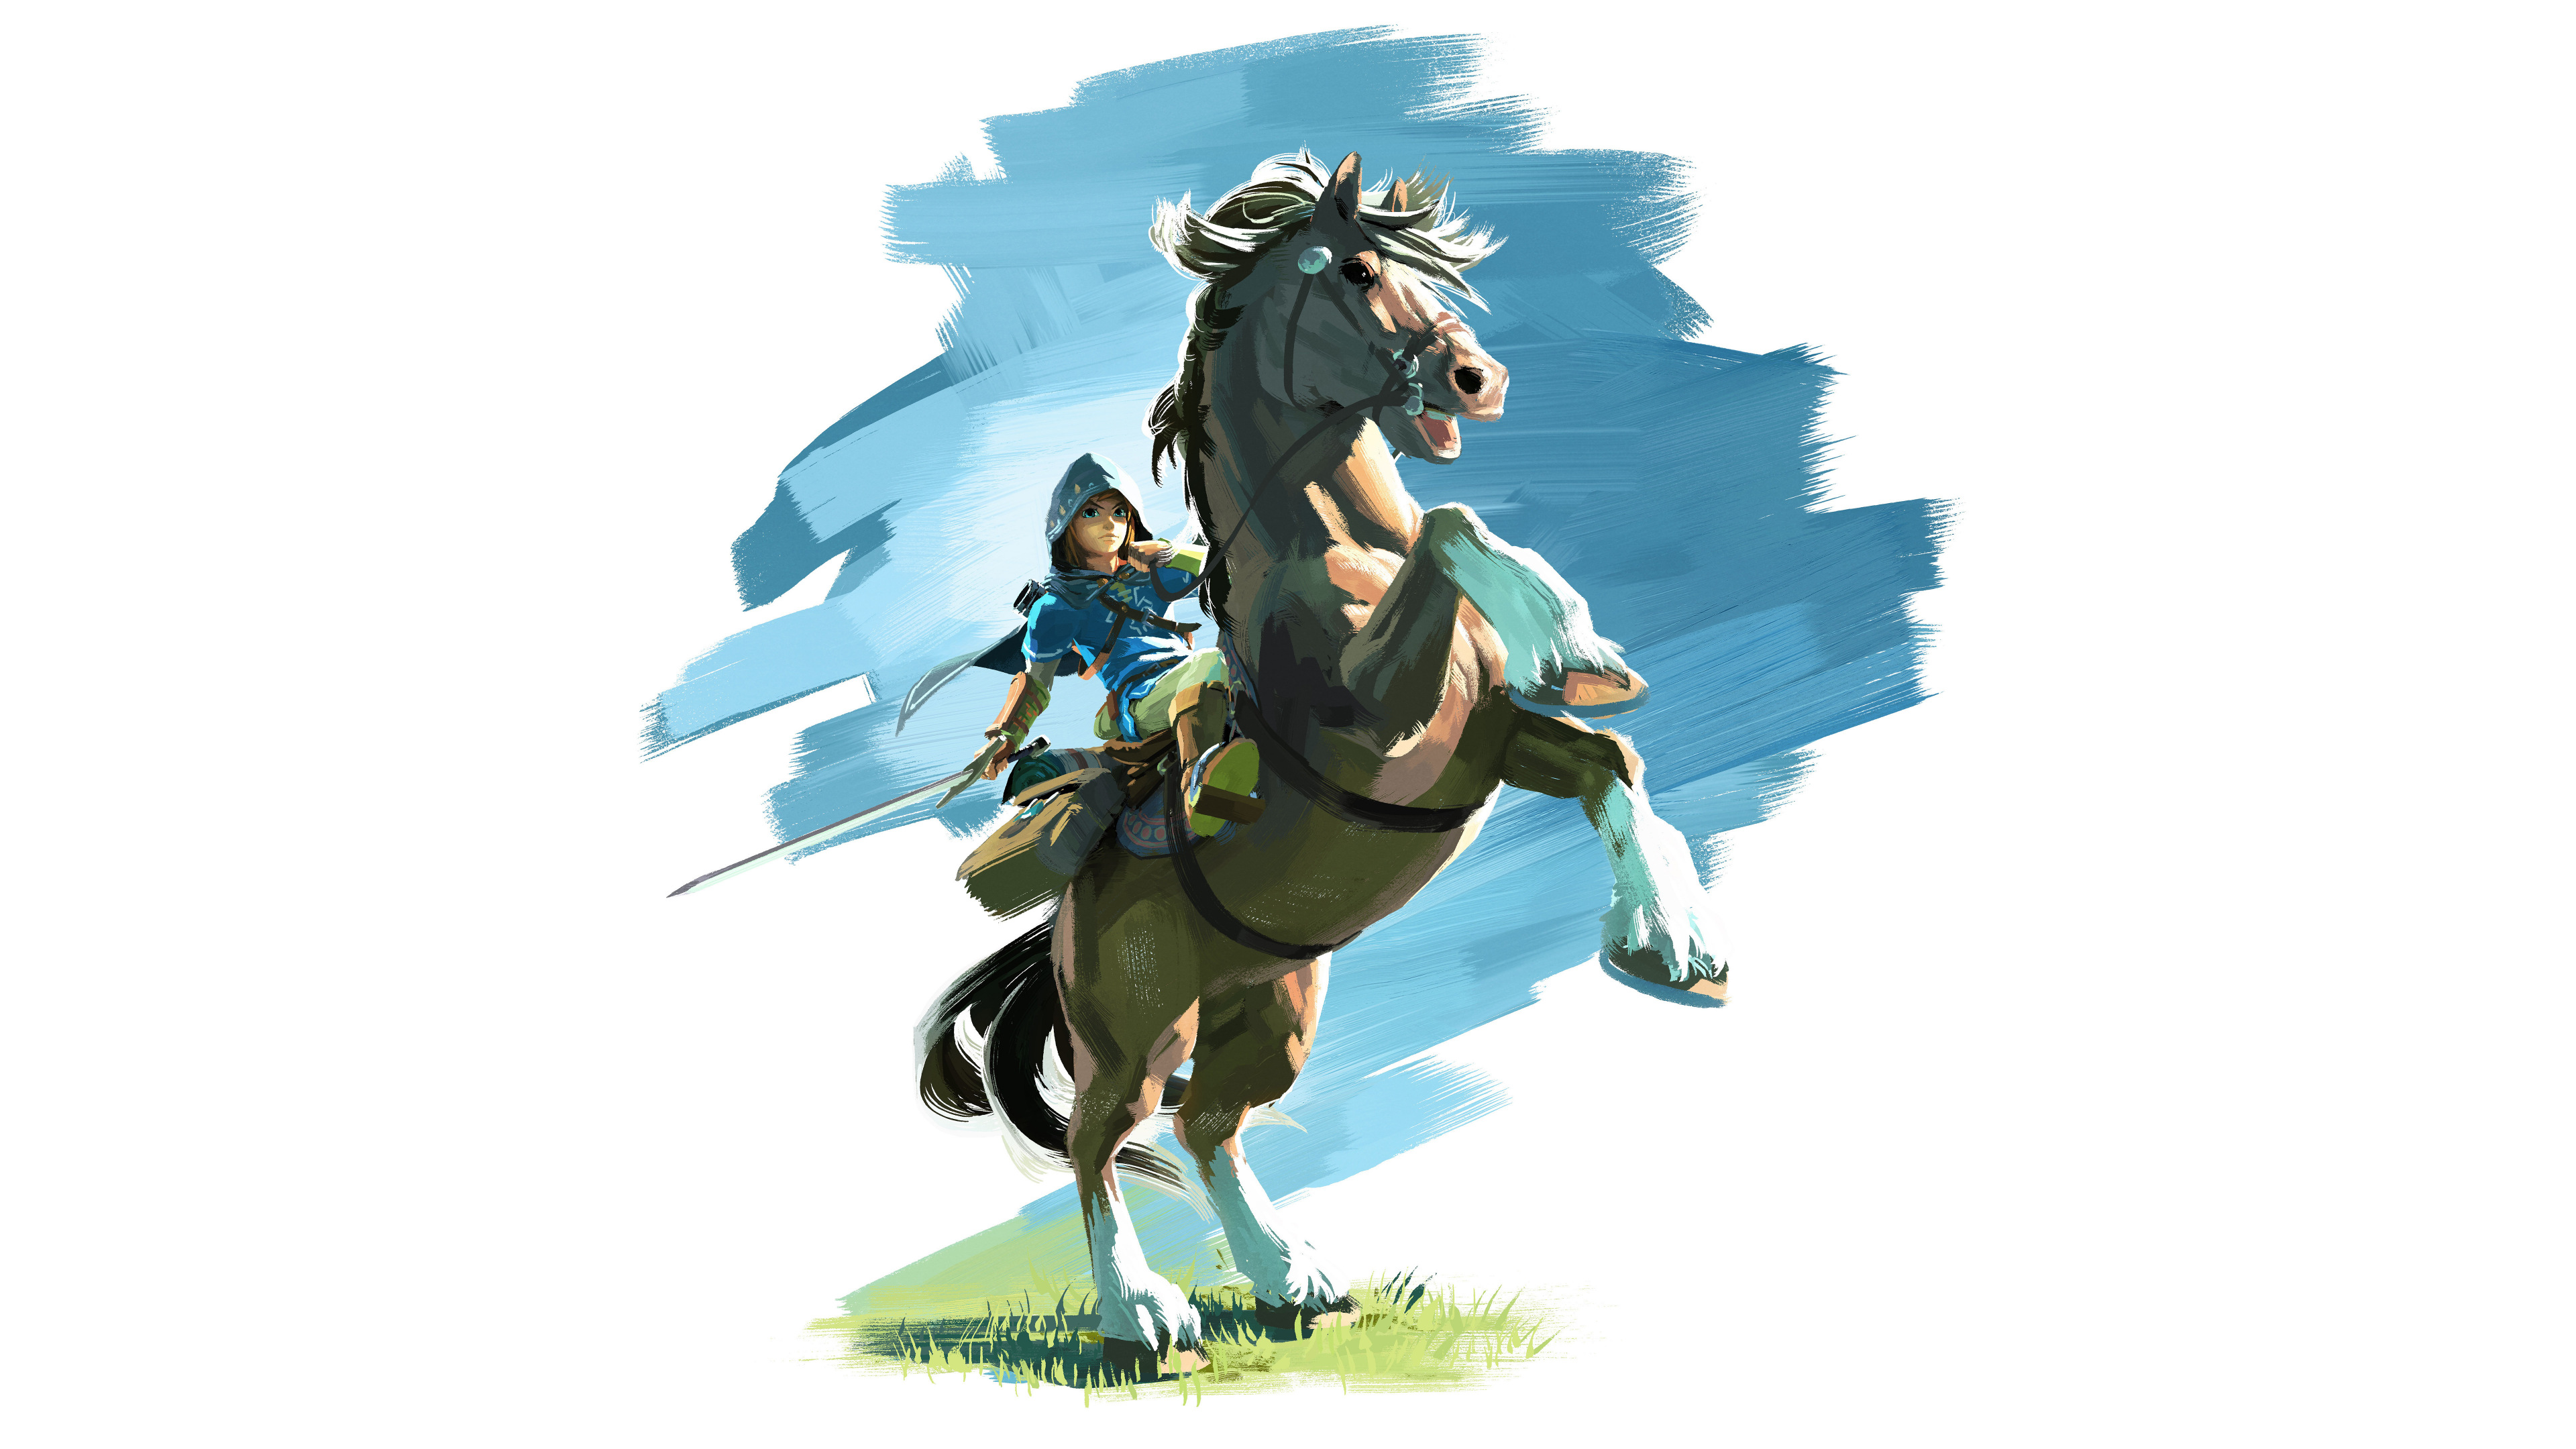 General 3840x2160 The Legend of Zelda: Breath of the Wild The Legend of Zelda video games video game art horse Video Game Heroes fantasy art simple background